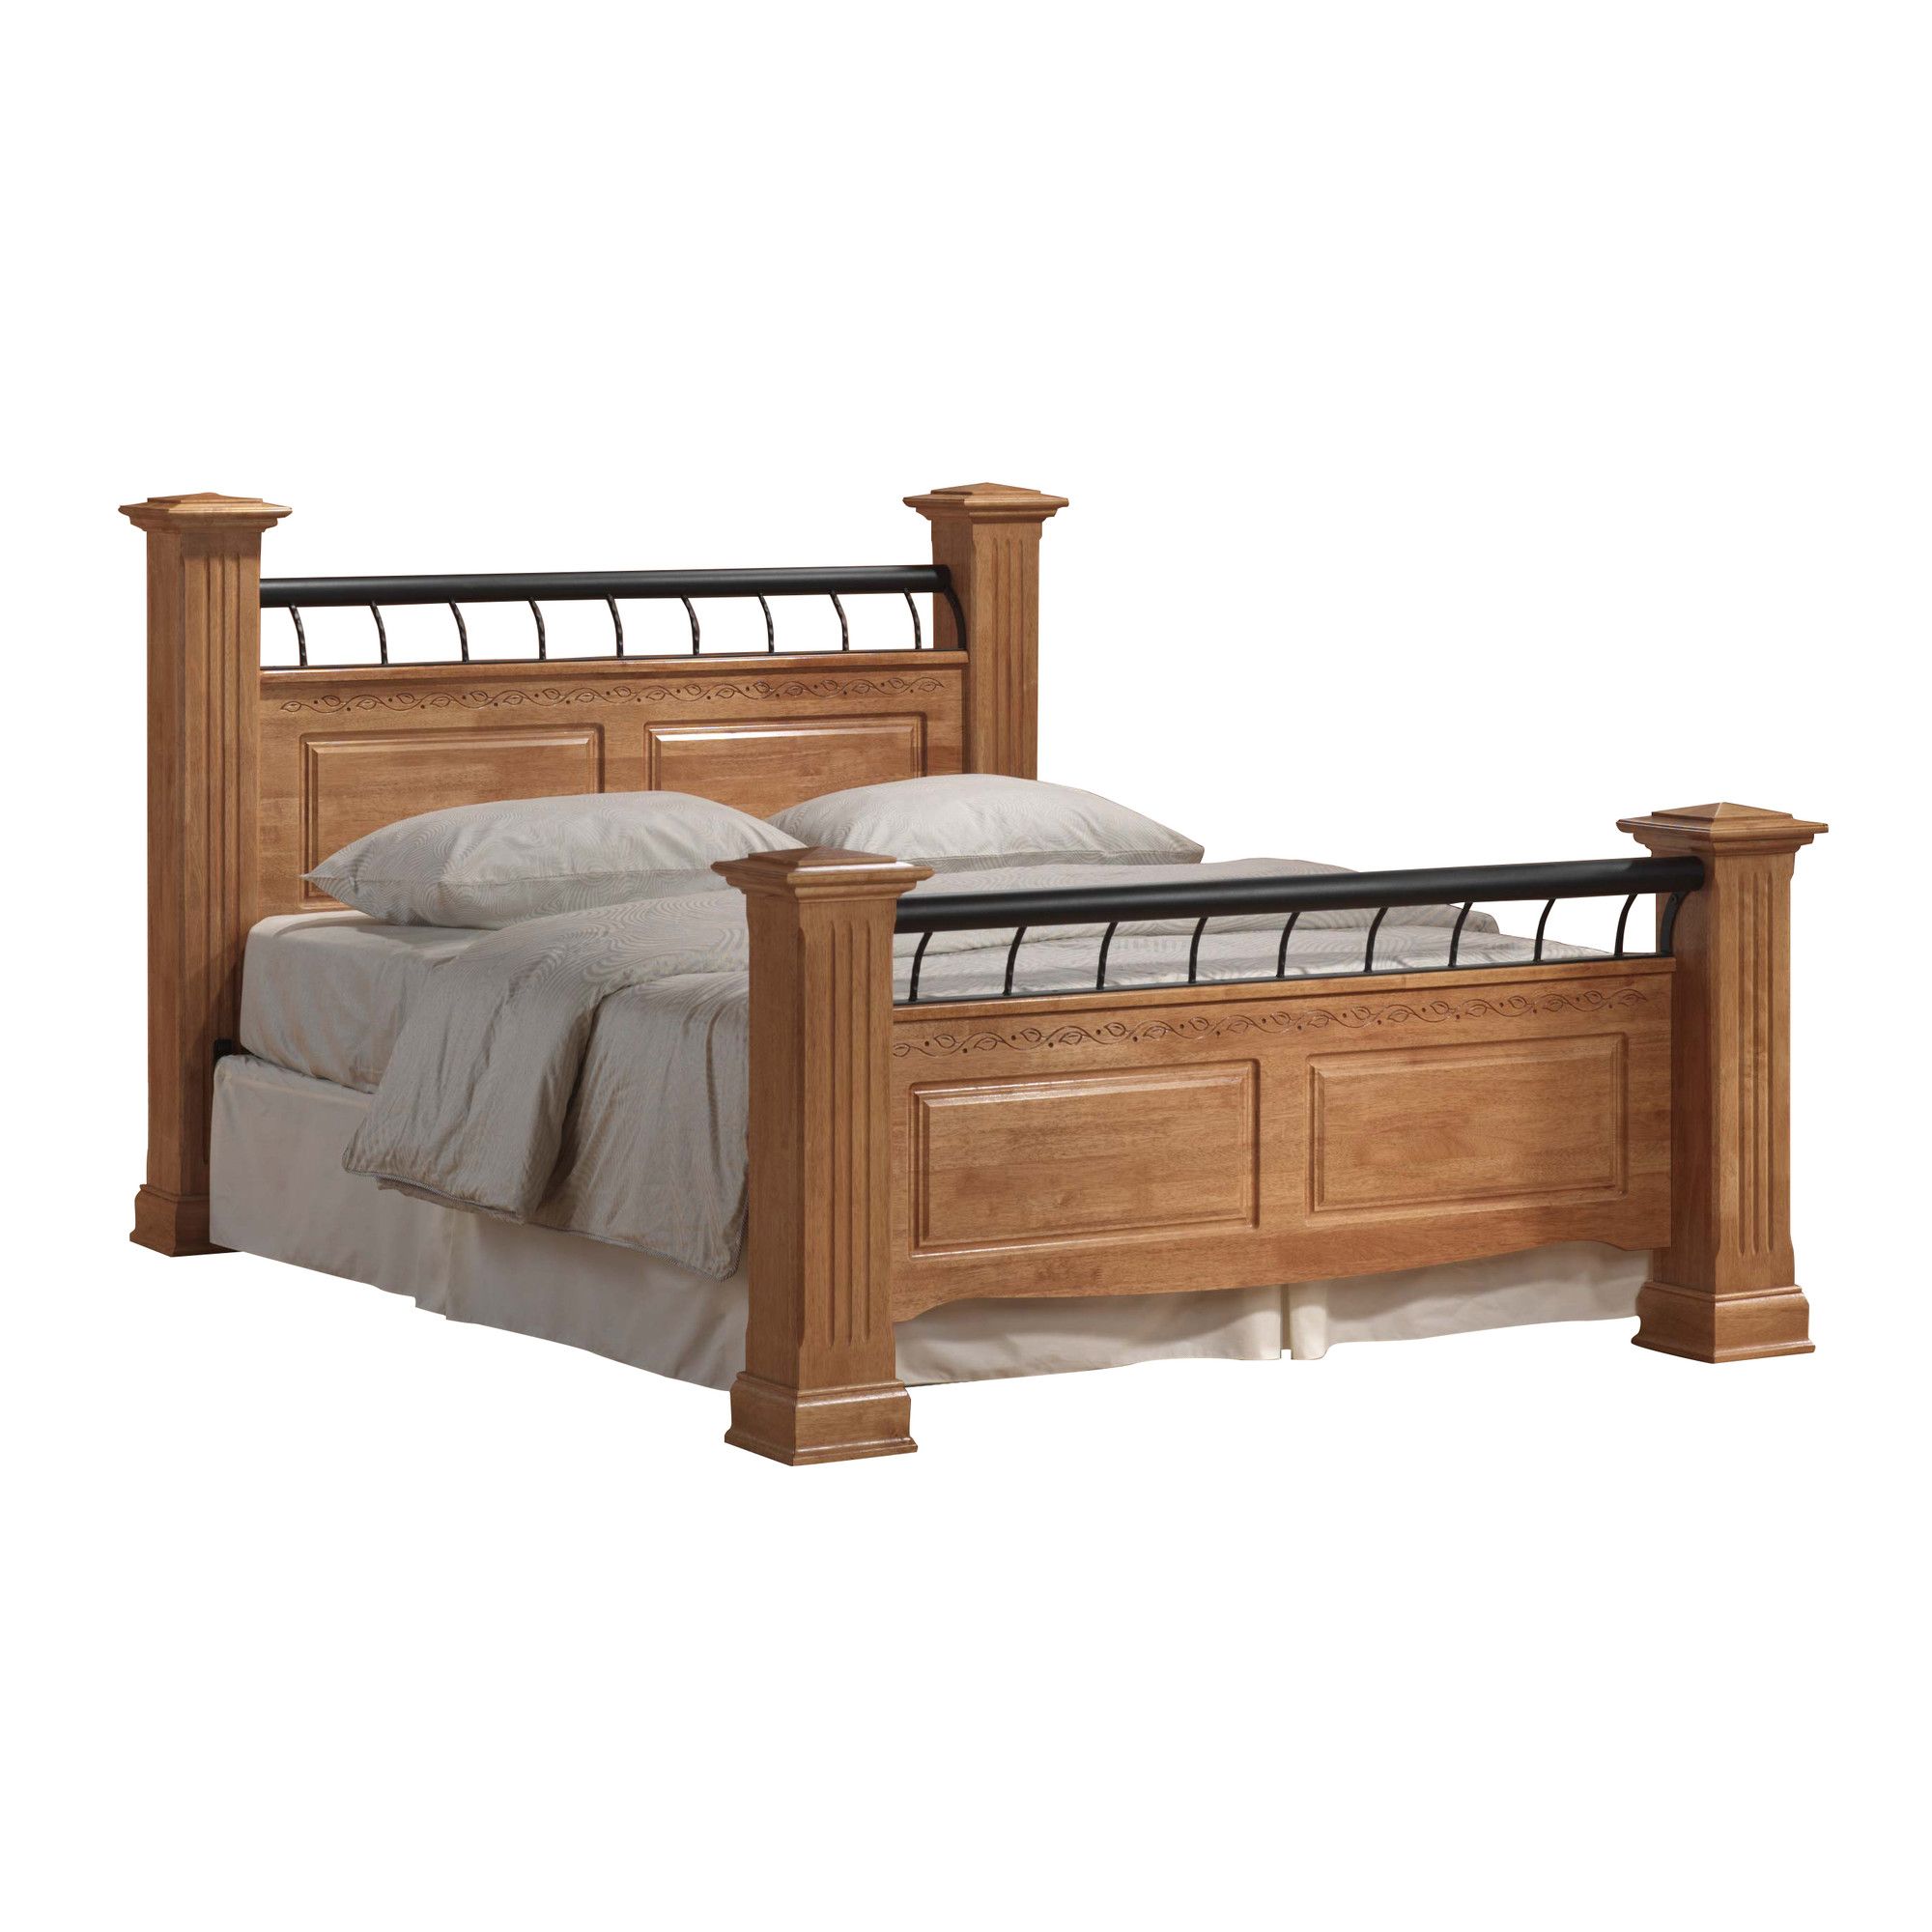 Ideal Furniture Rolo Bed - Double at Tesco Direct